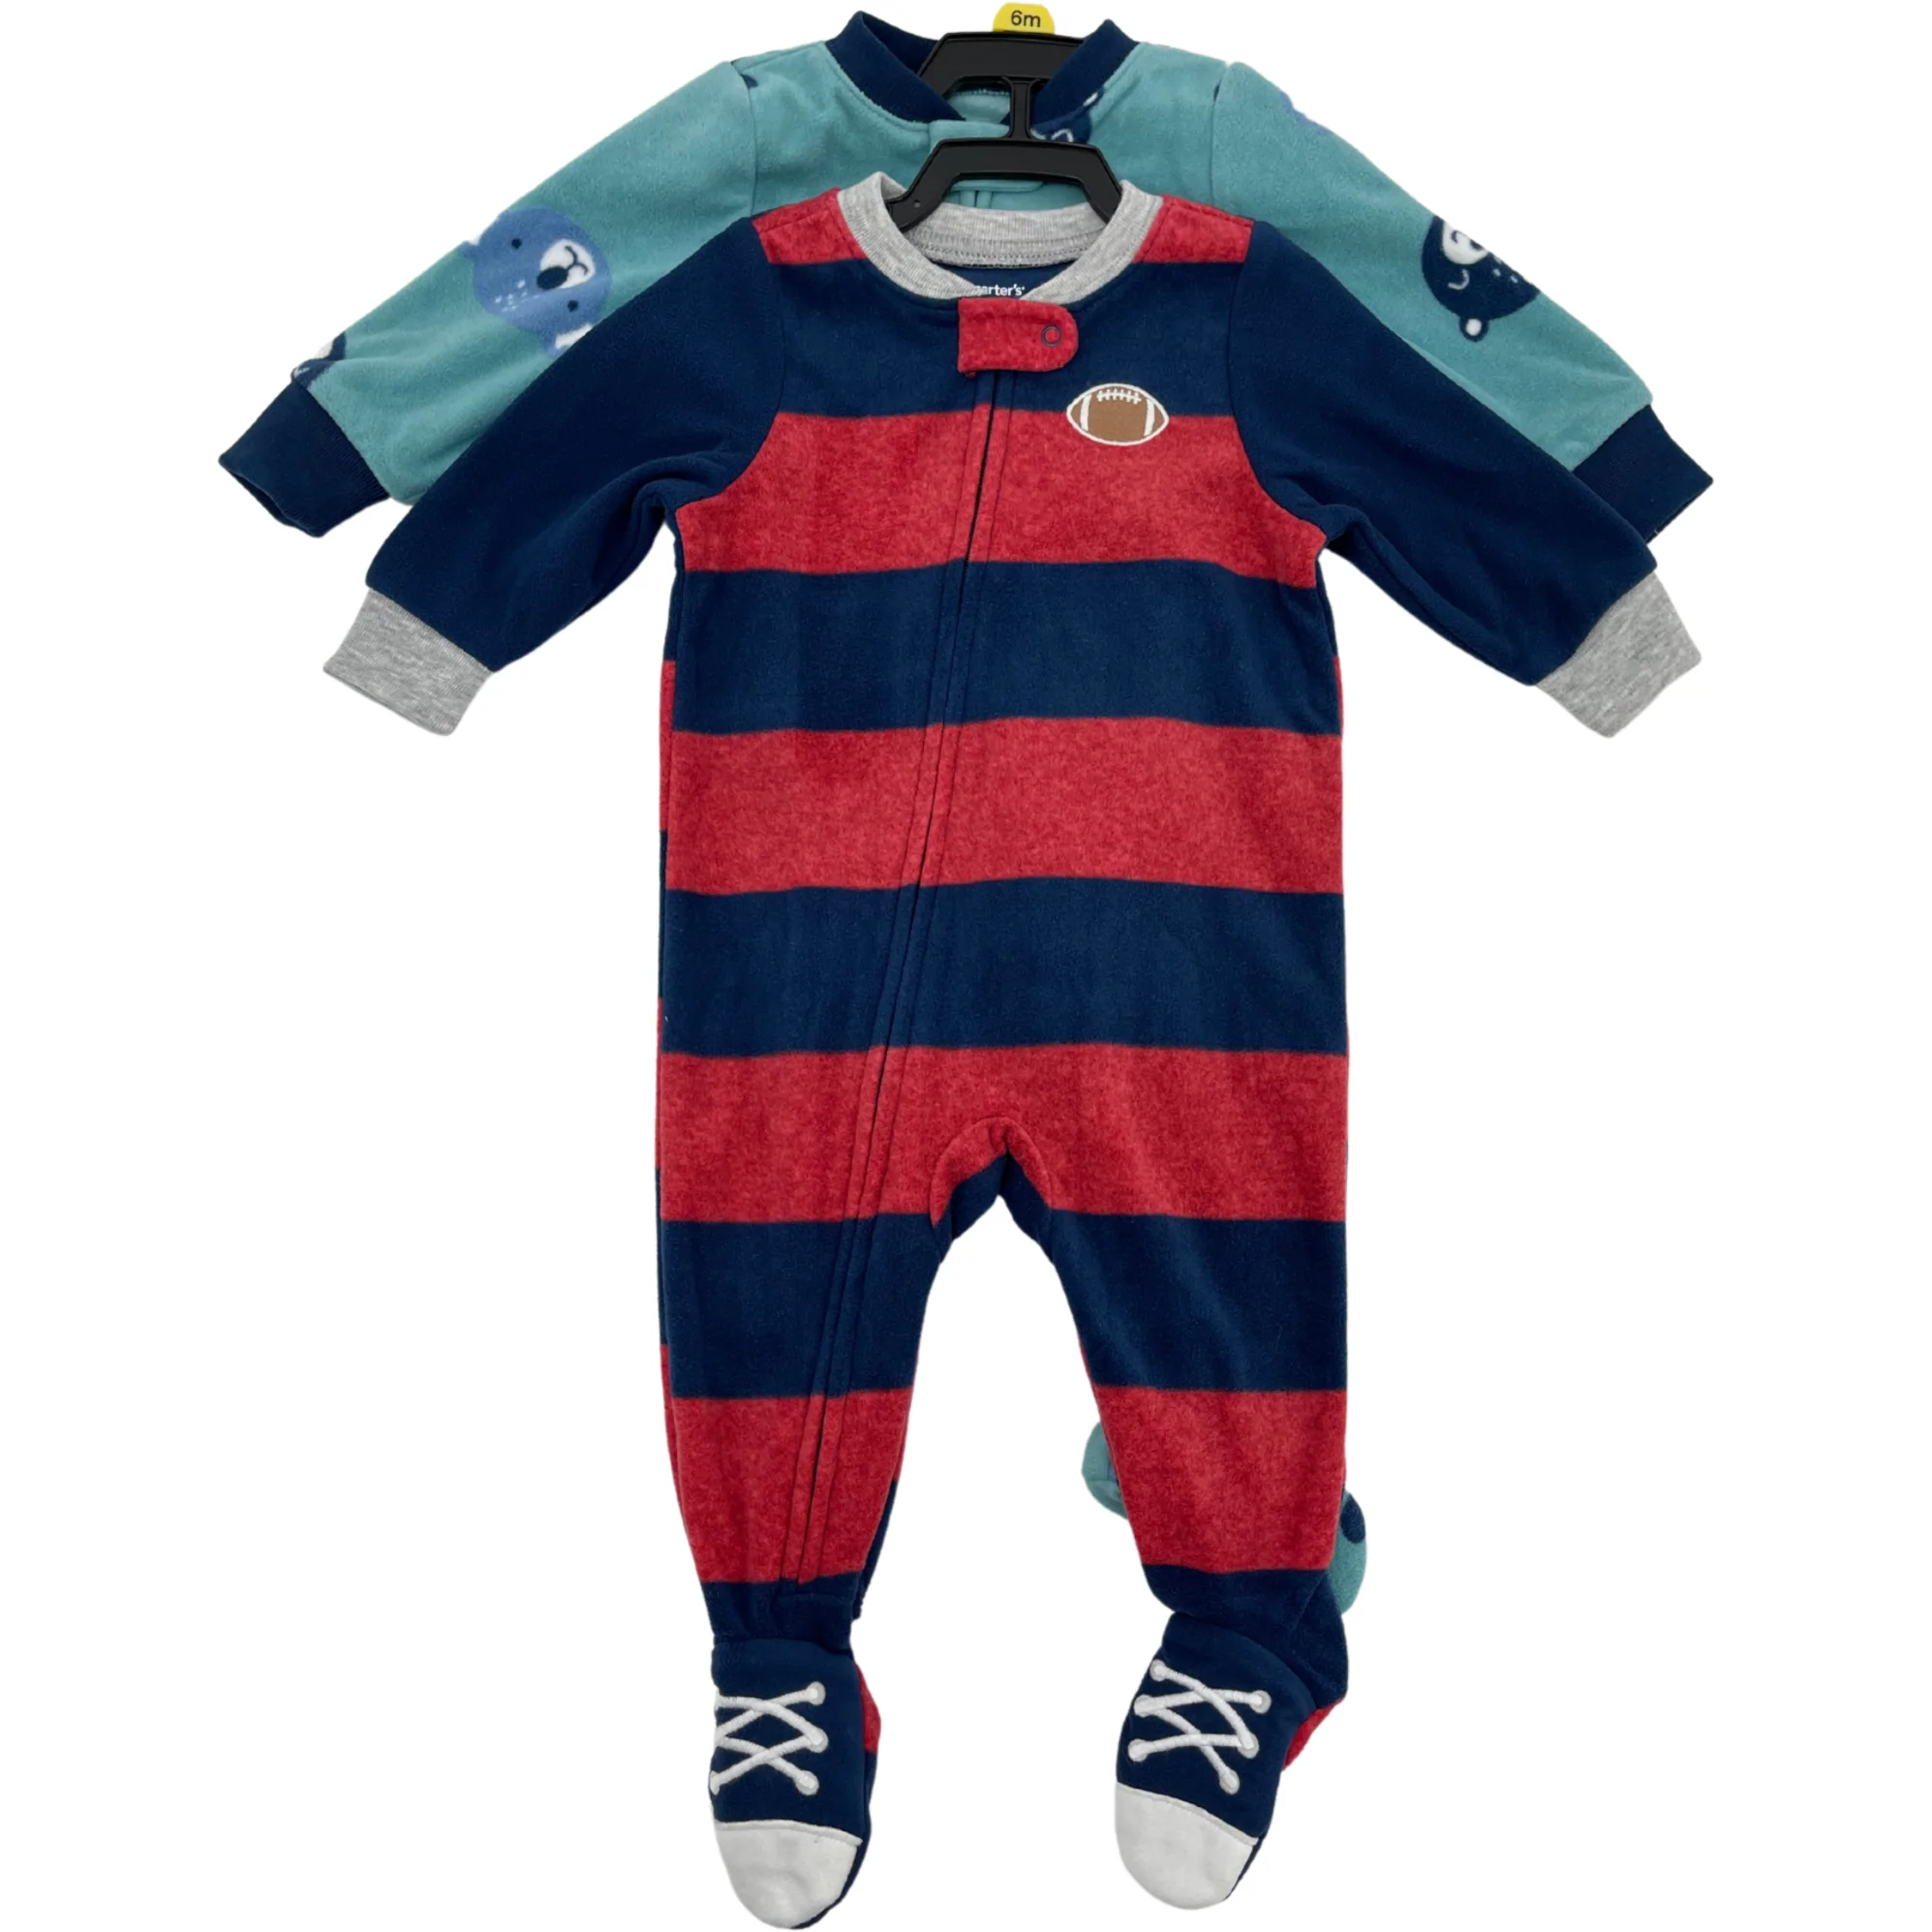 Carter's Infant Sleepers / One Piece Pyjama Set / 2 Pack / Football & Animals / Size 6 Months **No Tags**